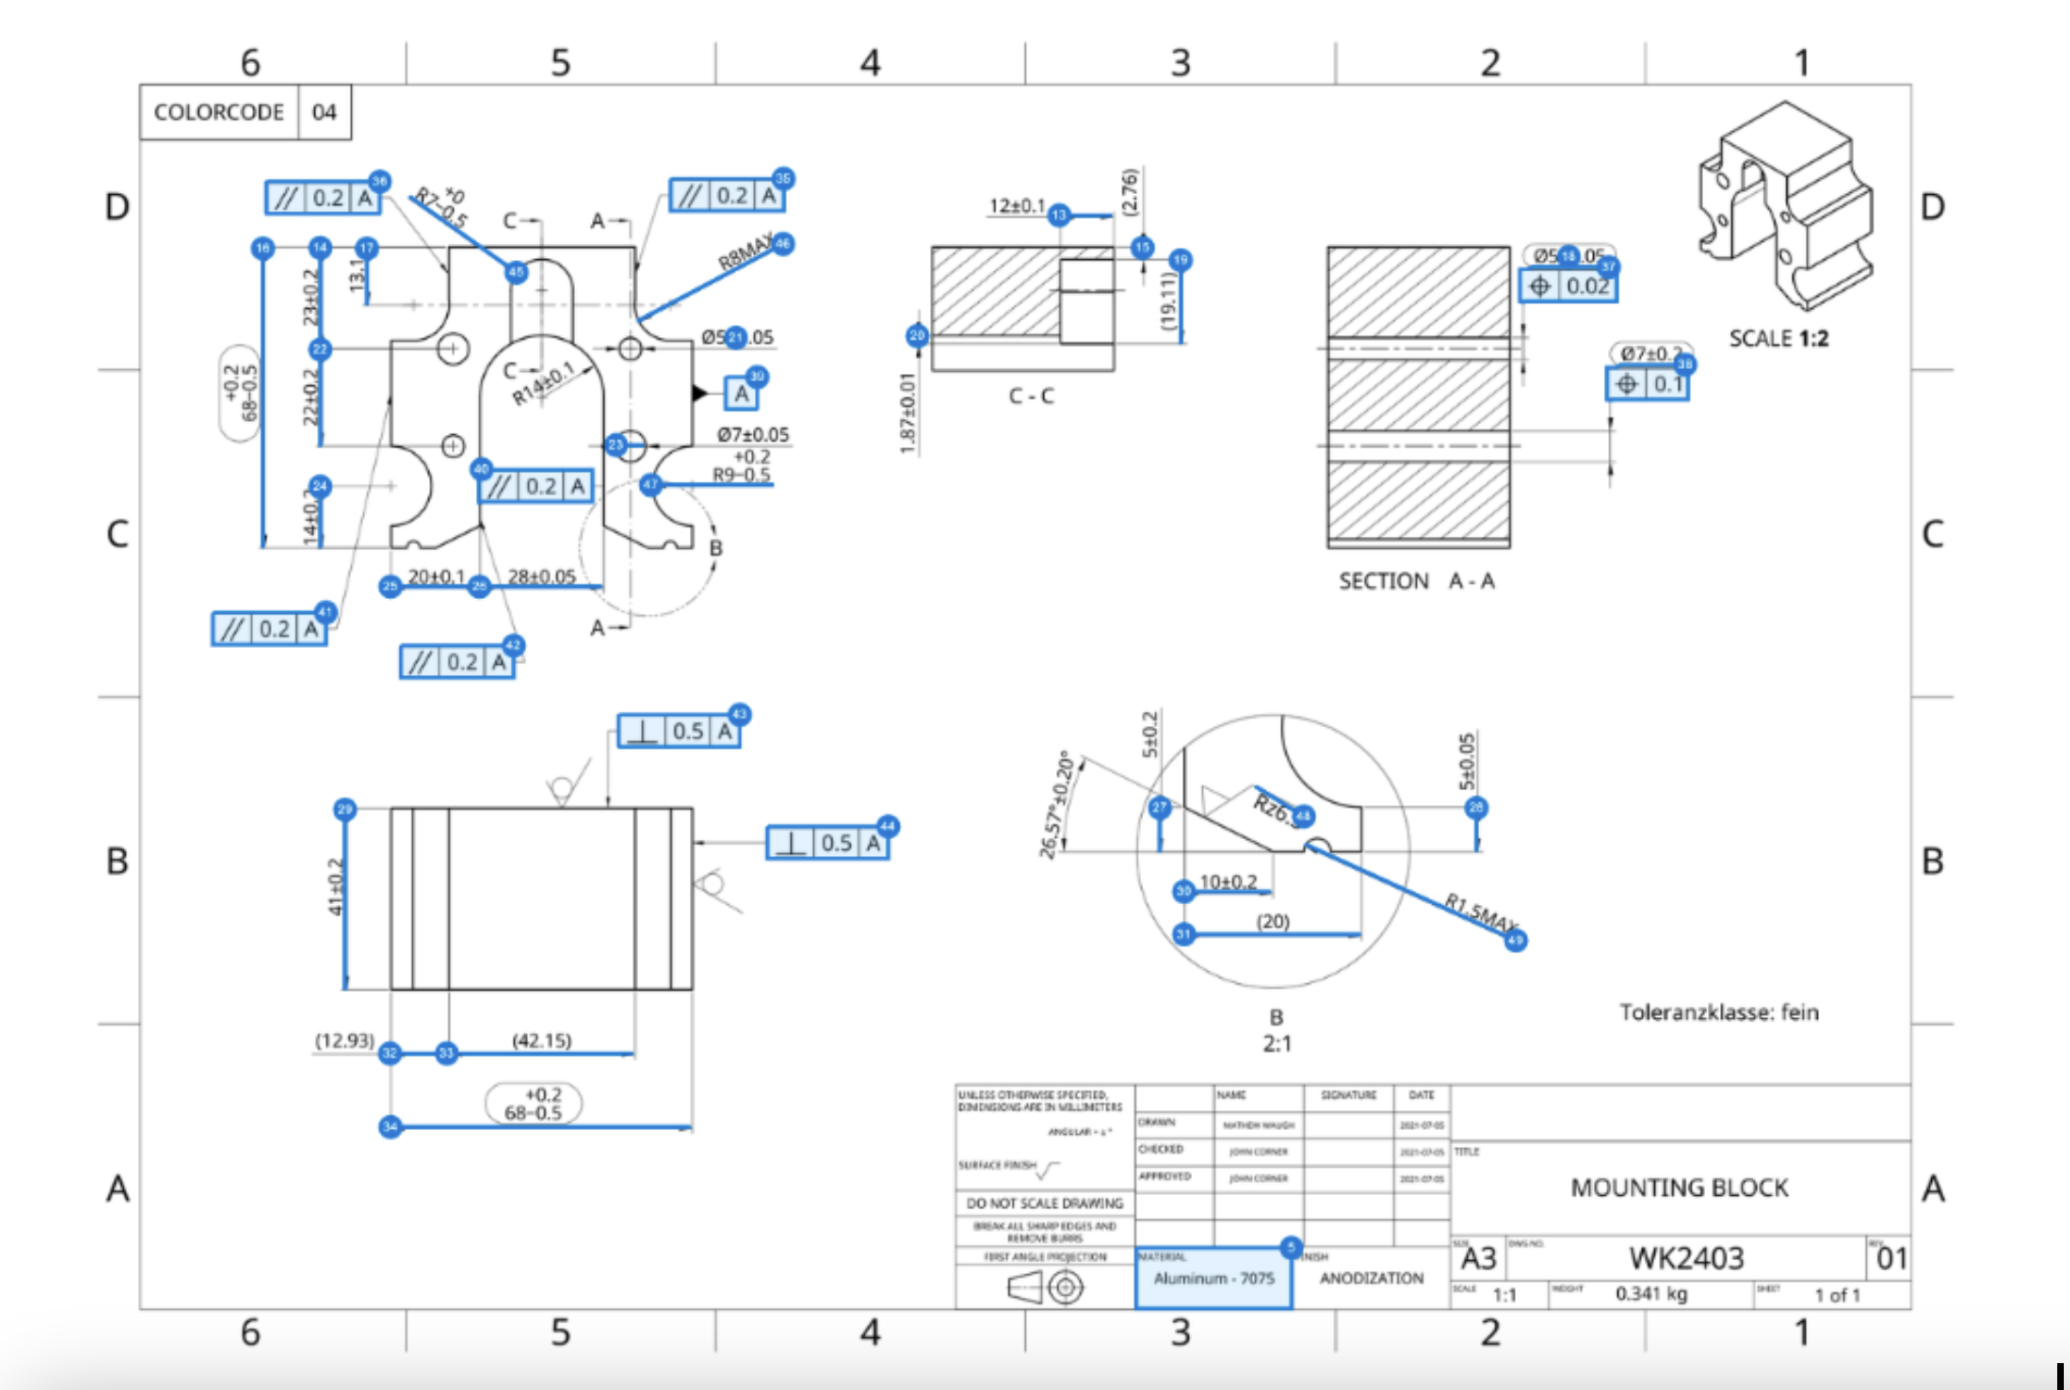 Example of a technical drawing with the most valuable information that is evaluated by 3YOURMIND’s part assessment software. 